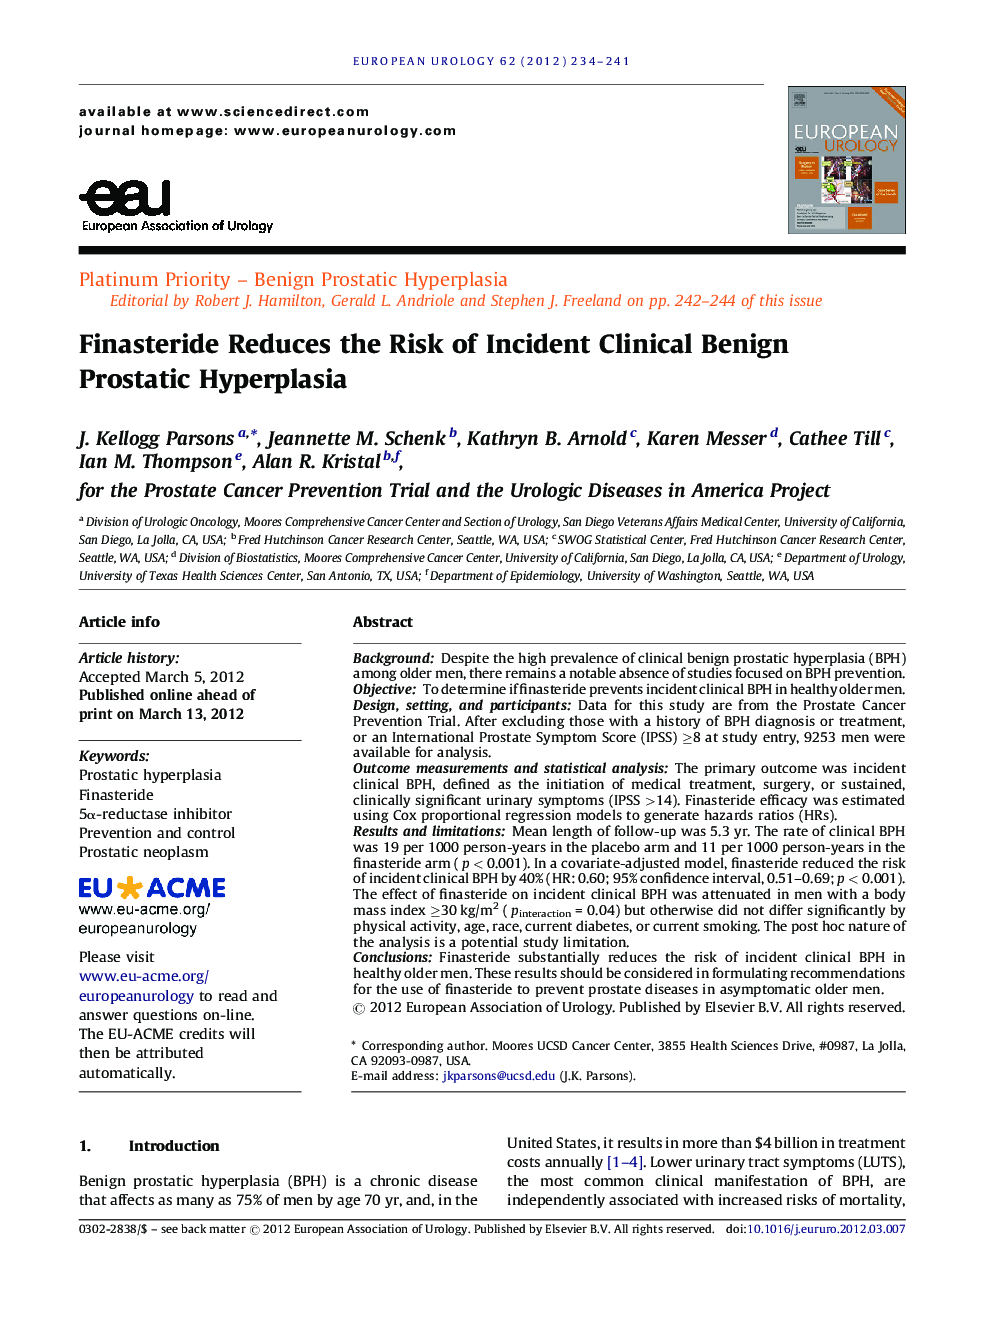 Finasteride Reduces the Risk of Incident Clinical Benign Prostatic Hyperplasia 